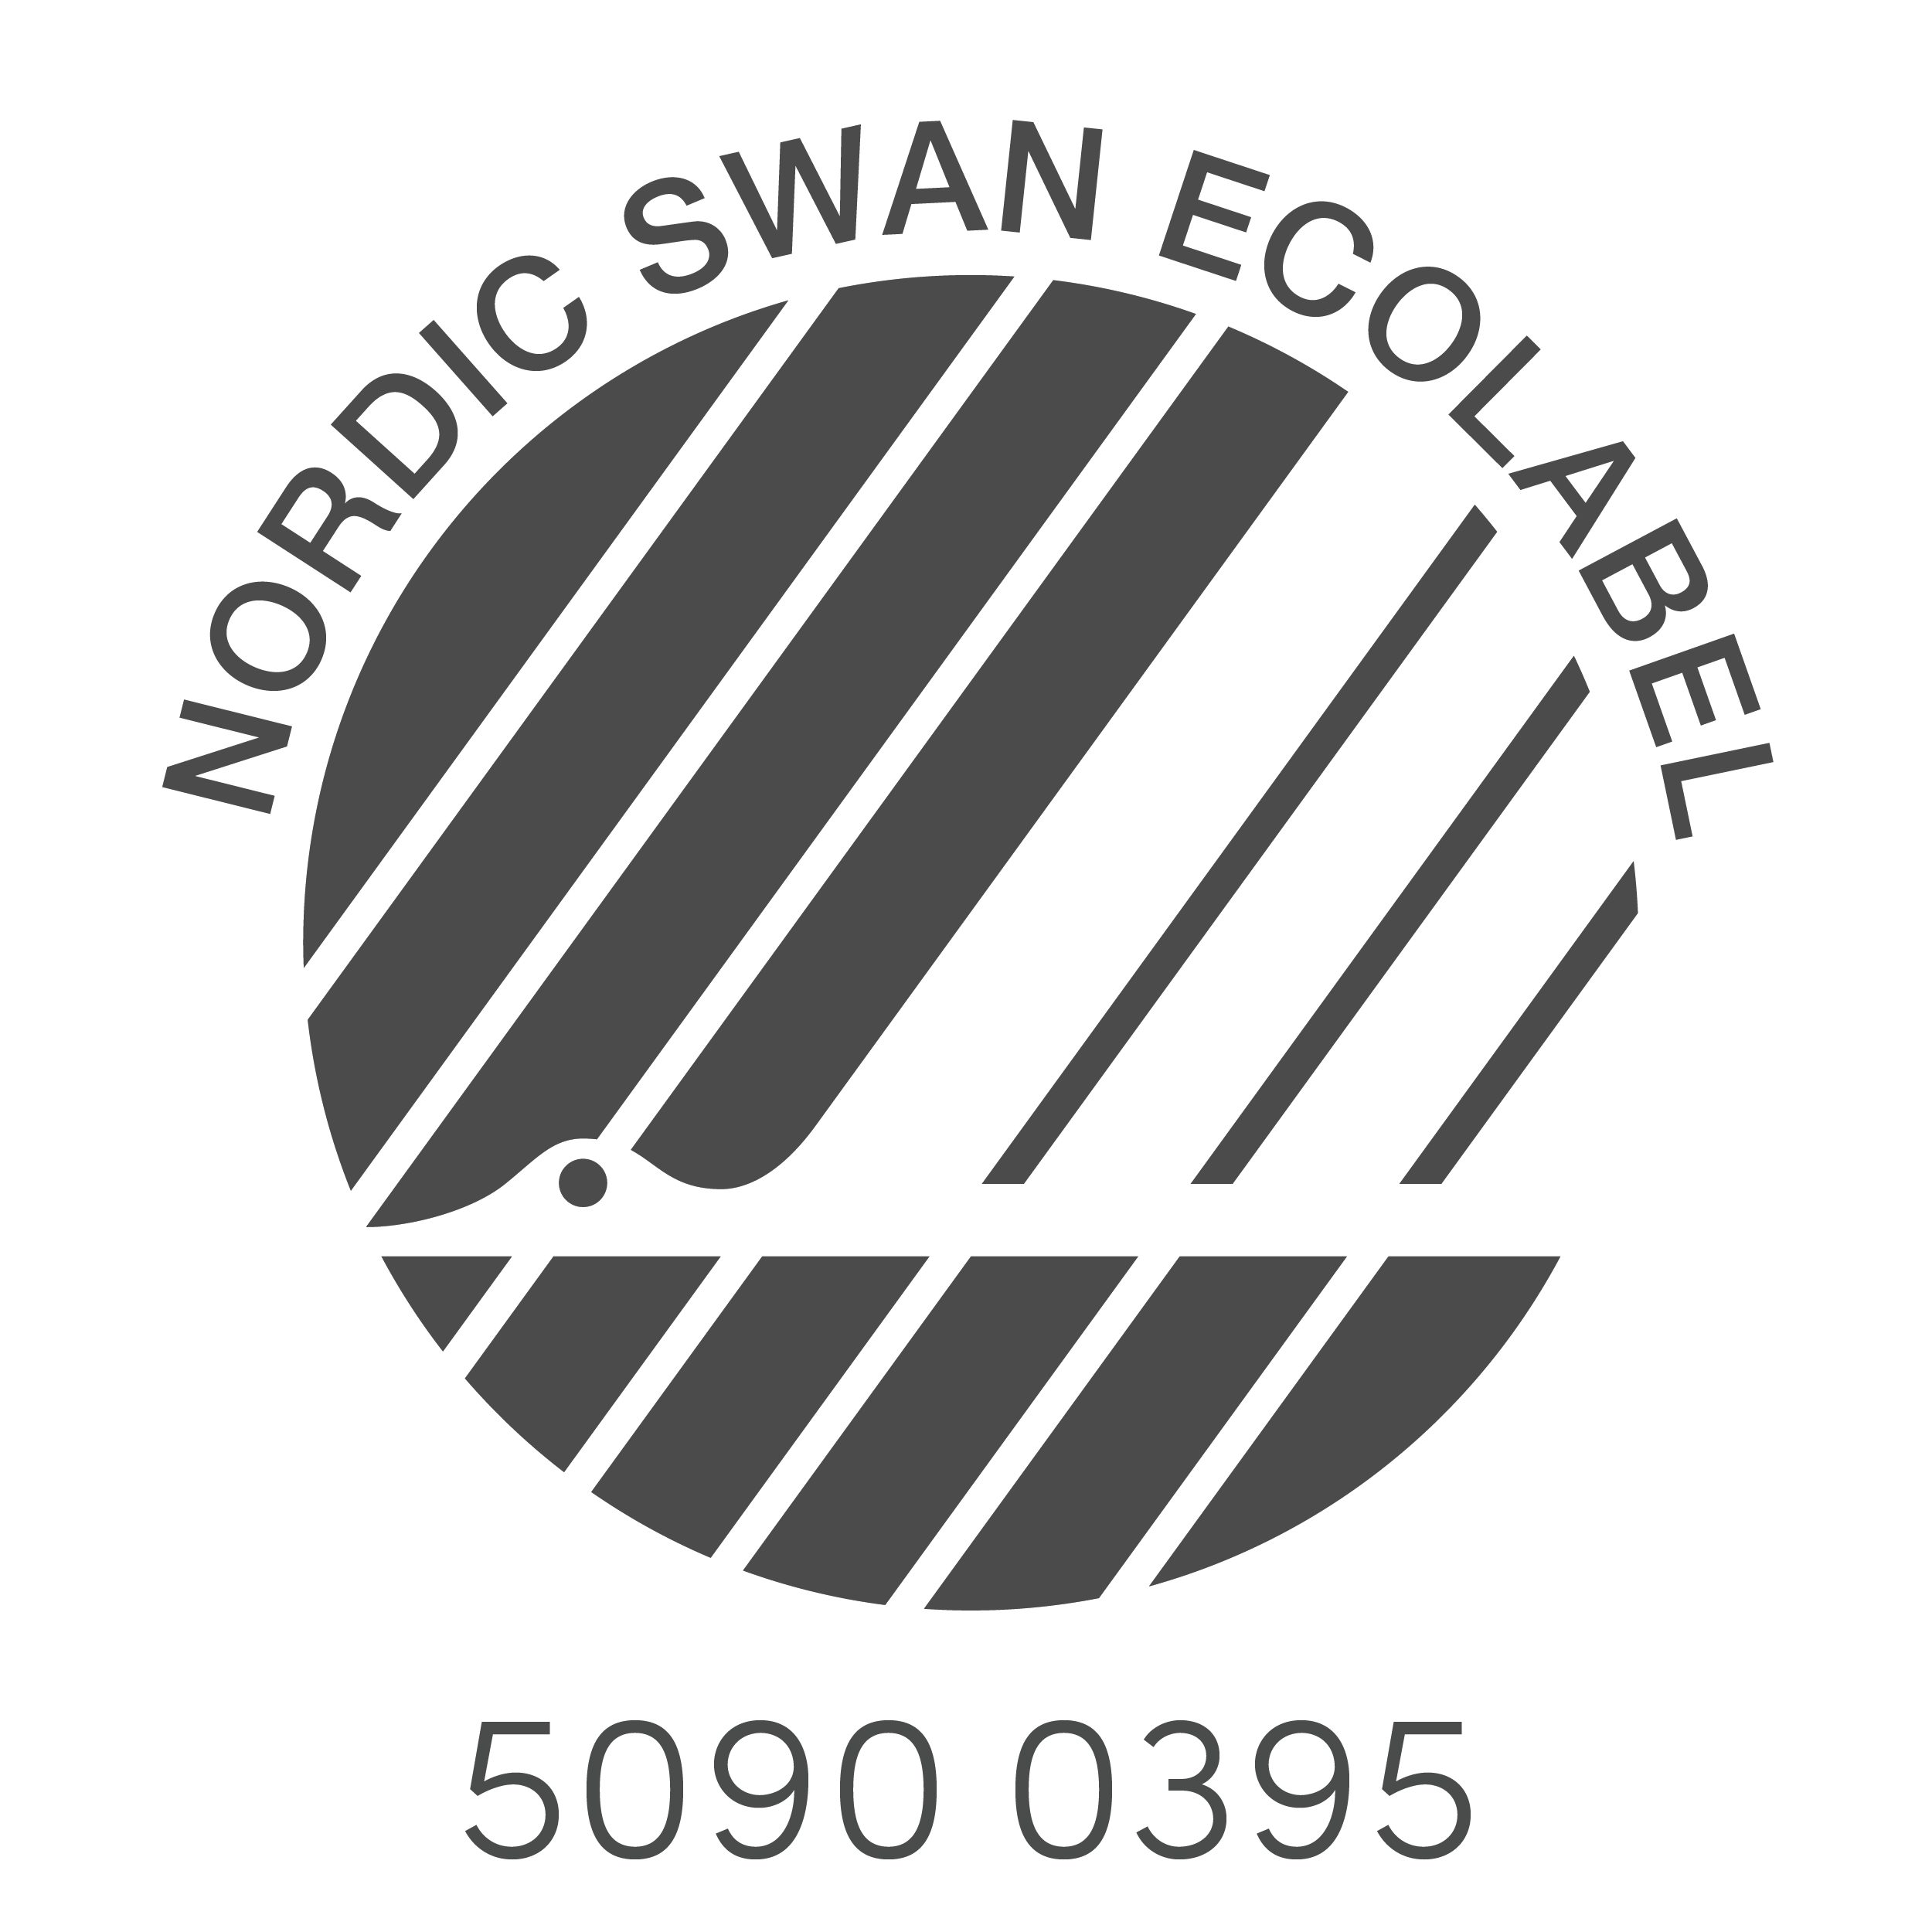 Nordic Eco Swan Lable - Lille kanin